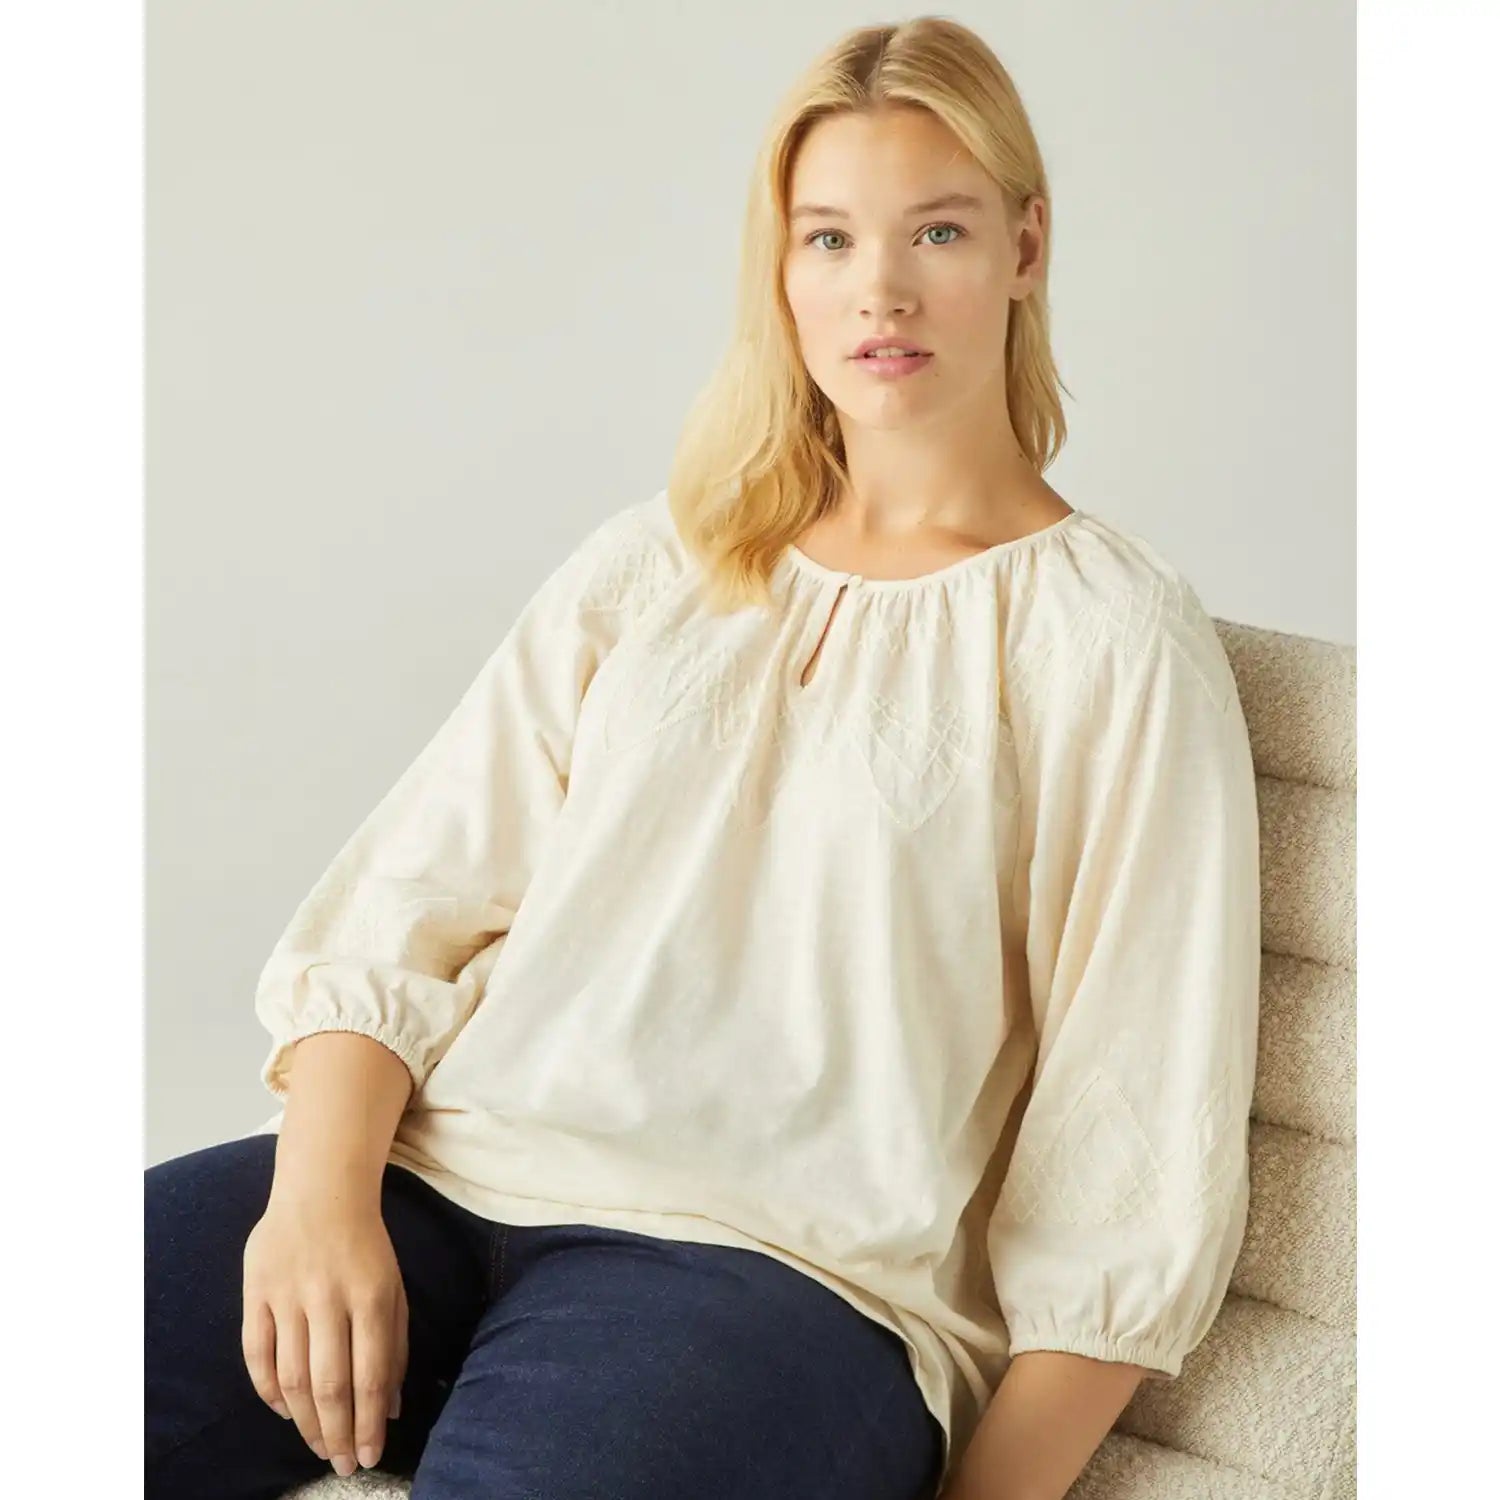 Couchel T-Shirt With Collar - White 1 Shaws Department Stores